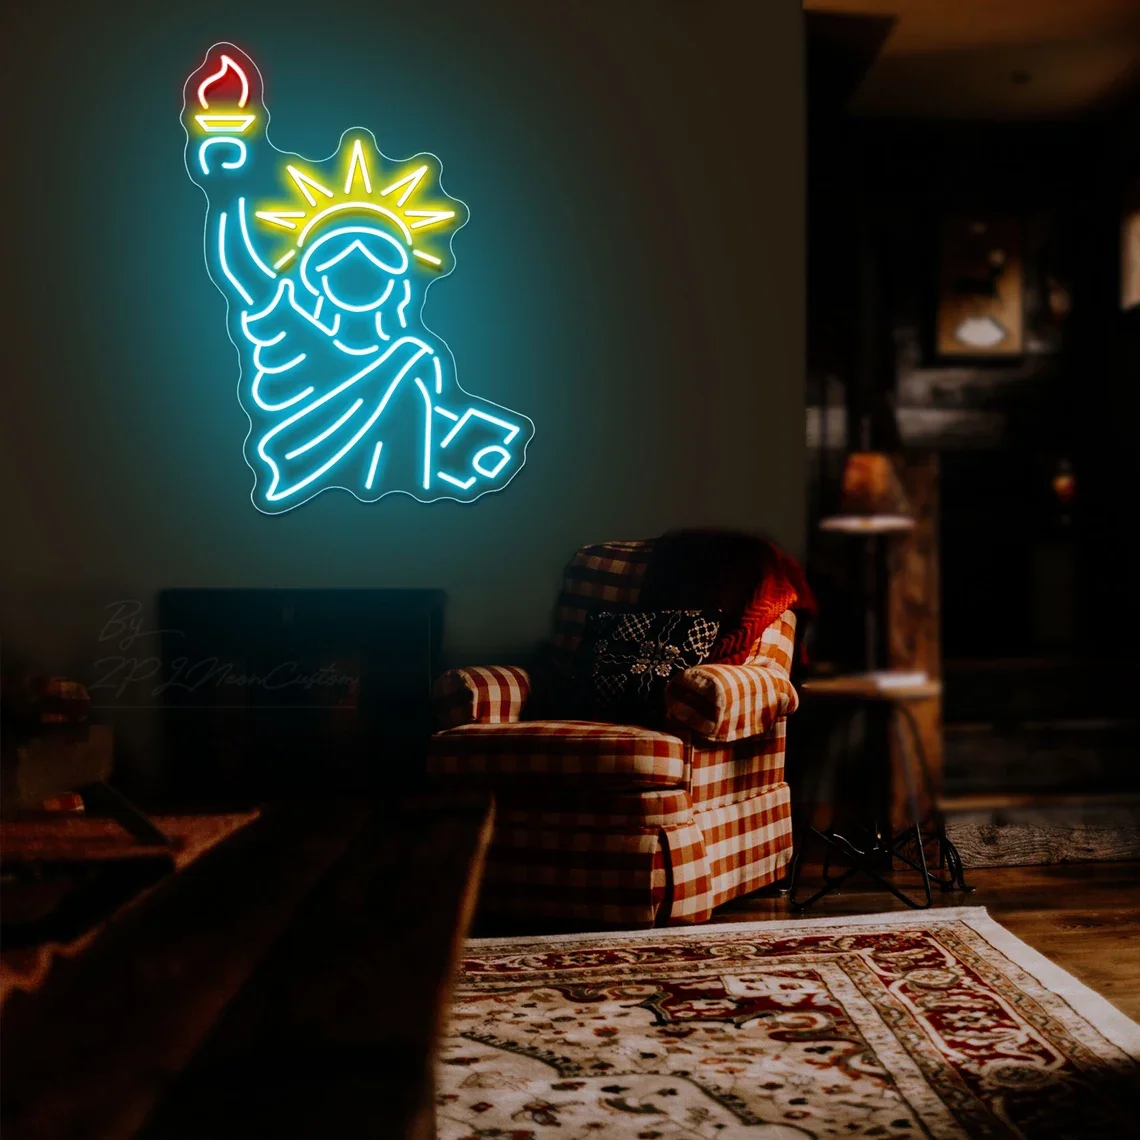 

Statue Of Liberty LED Neon Sign Led Sign for Bedroom Wall Art Decor Neon Decorations New York Landmark Signage